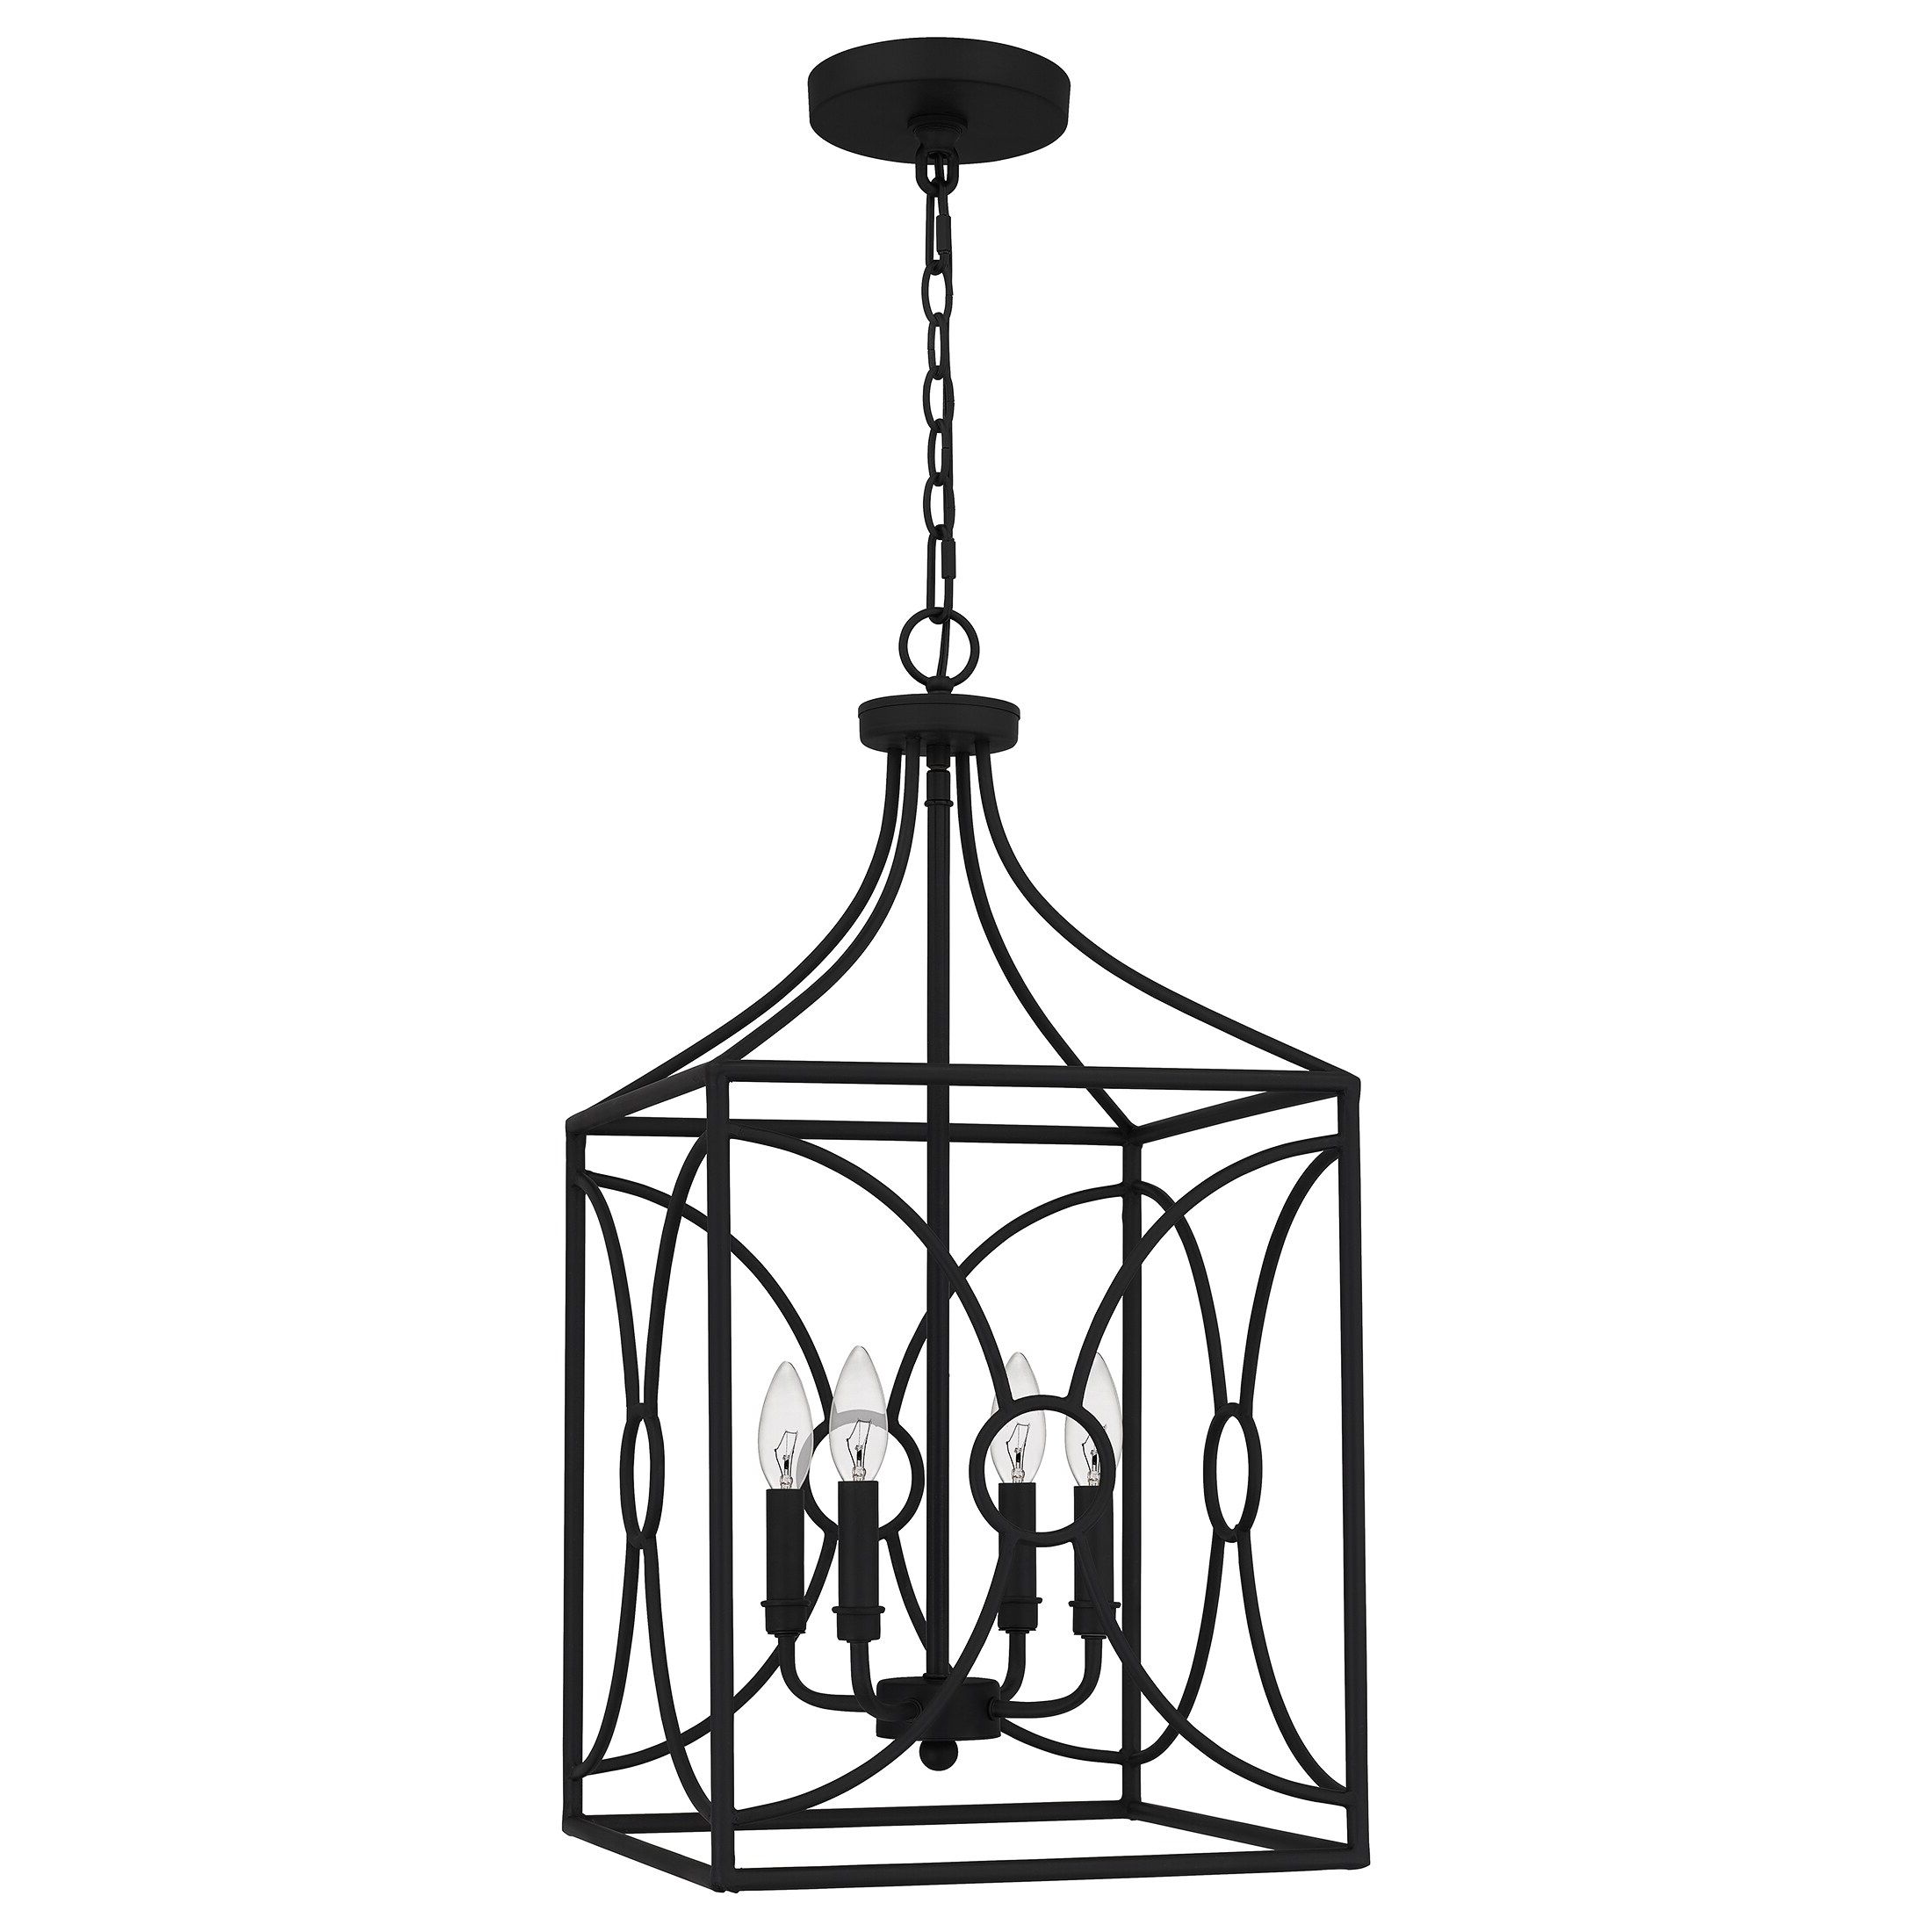 Quoizel Grenelle 4 Light Matte Black Traditional Lantern Pendant Light In  The Pendant Lighting Department At Lowes Pertaining To Famous Black With White Lantern Chandeliers (View 9 of 15)